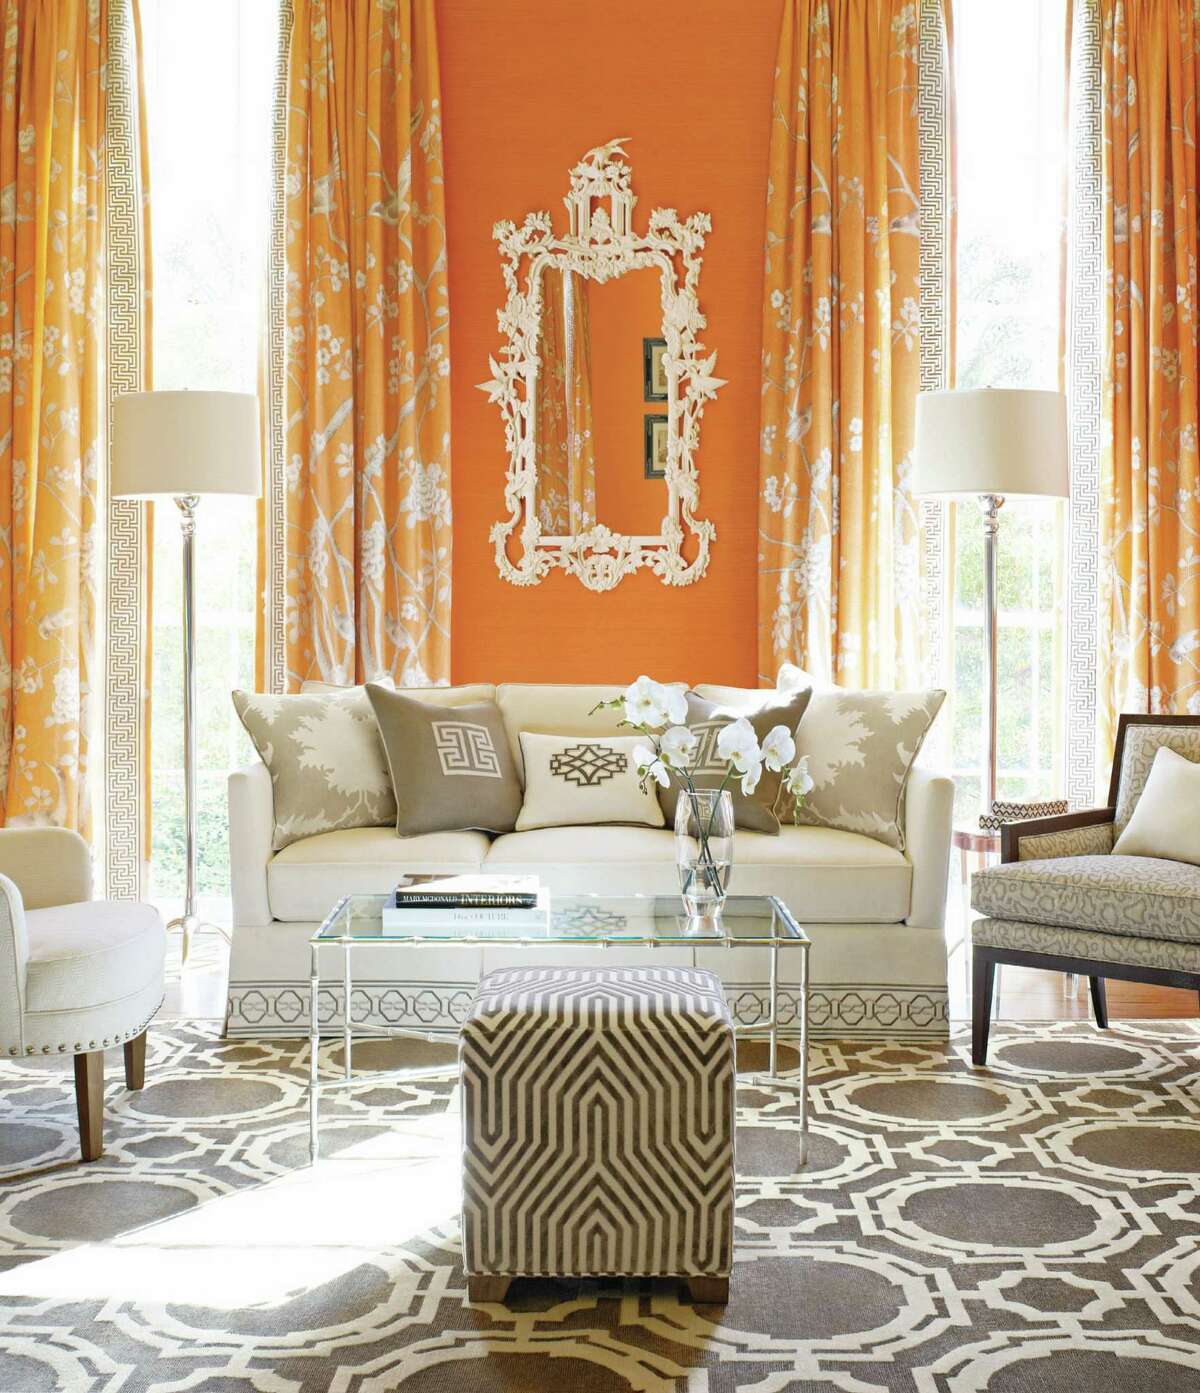 A room designed by Mary McDonald of "Millon Dollar Decorators," who will be making an appearance at Decorative Center Houston on May 1 for DCH Spring Market.